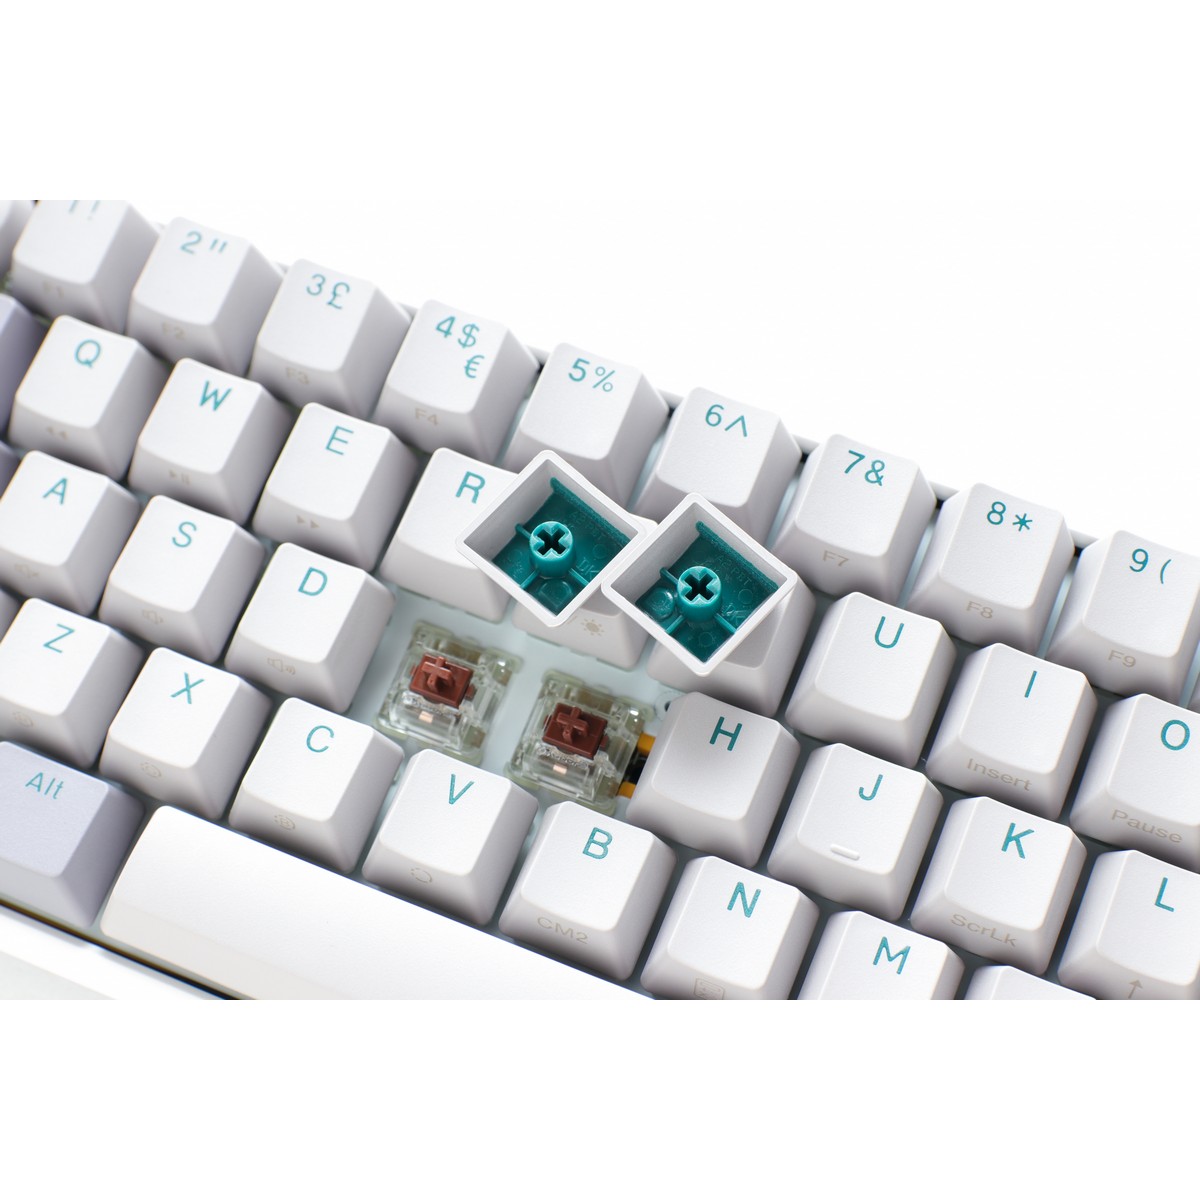 Ducky - Ducky One 3 Mist SF 65% USB RGB Mechanical Gaming Keyboard Cherry MX Brown Switch - UK Layout